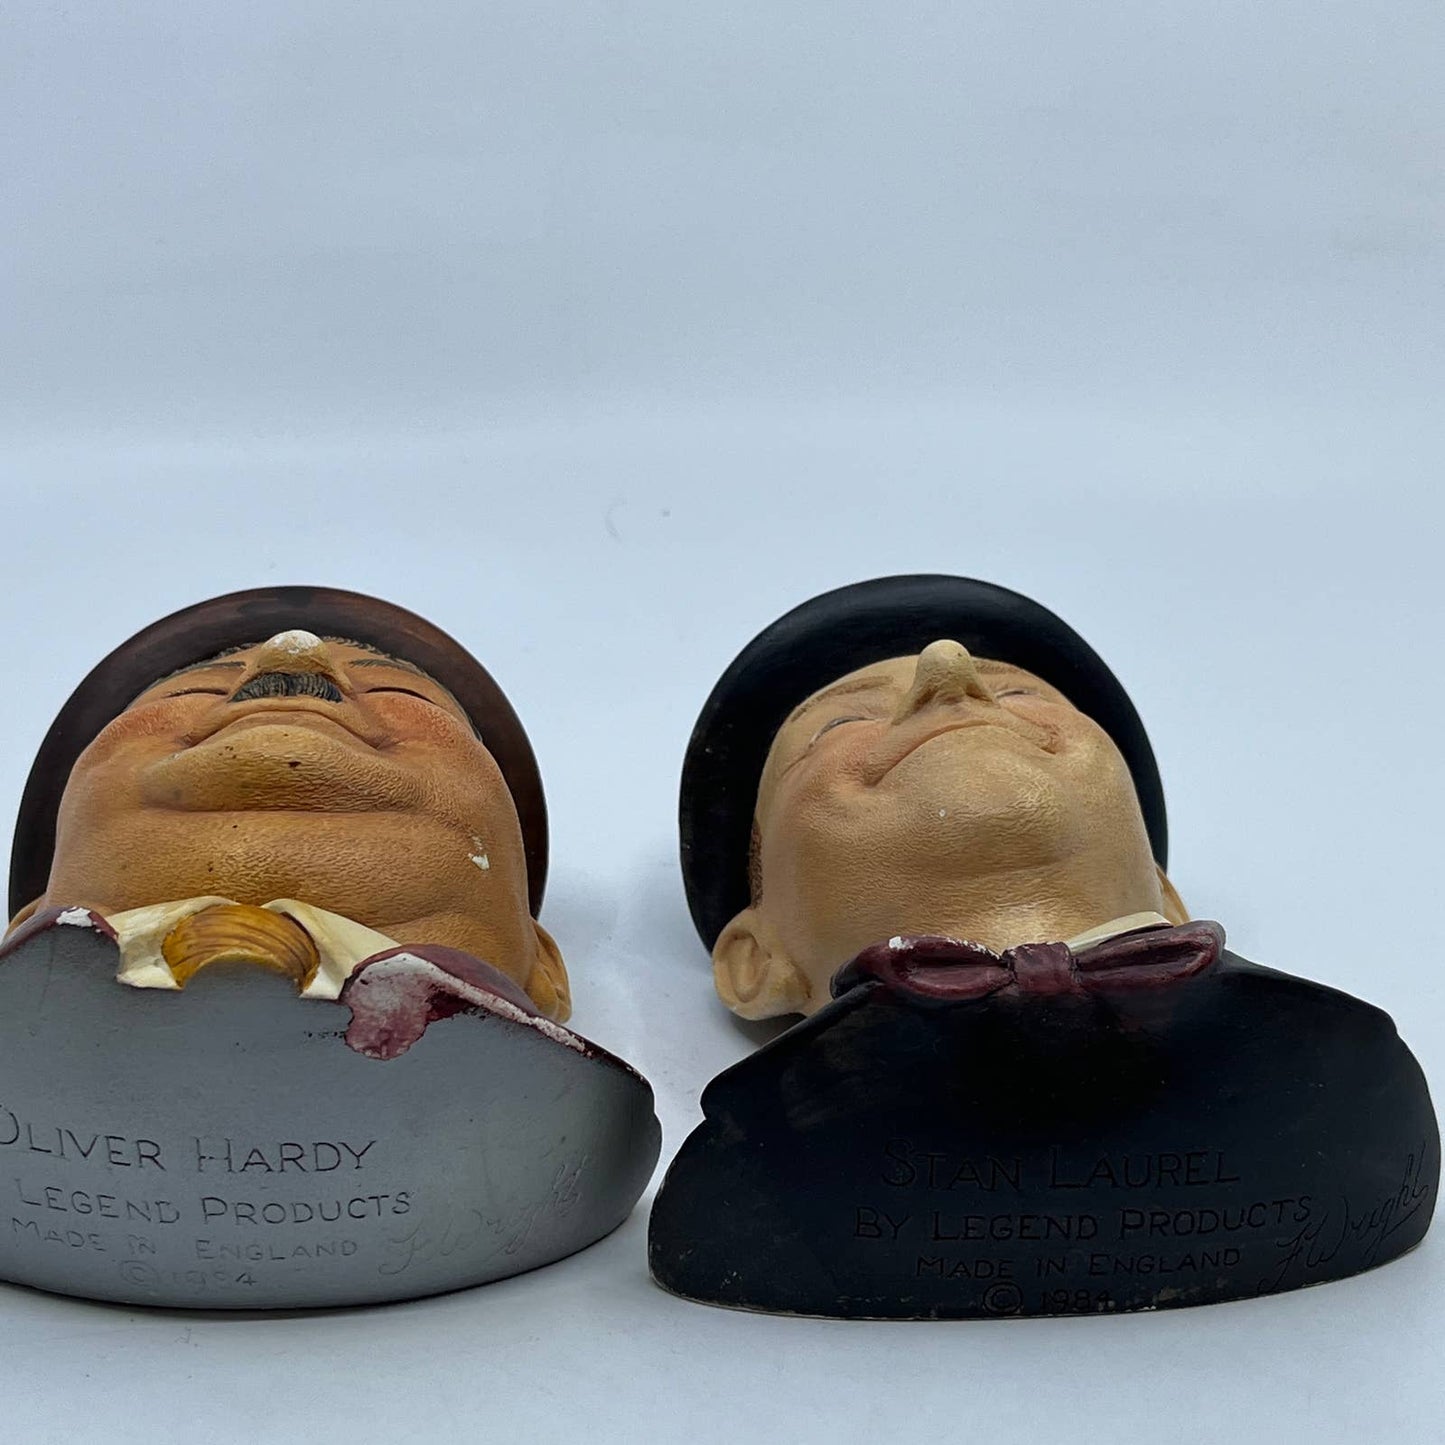 Bossons Laurel & Hardy Legend Products Chalkware Heads- 1984 TC8